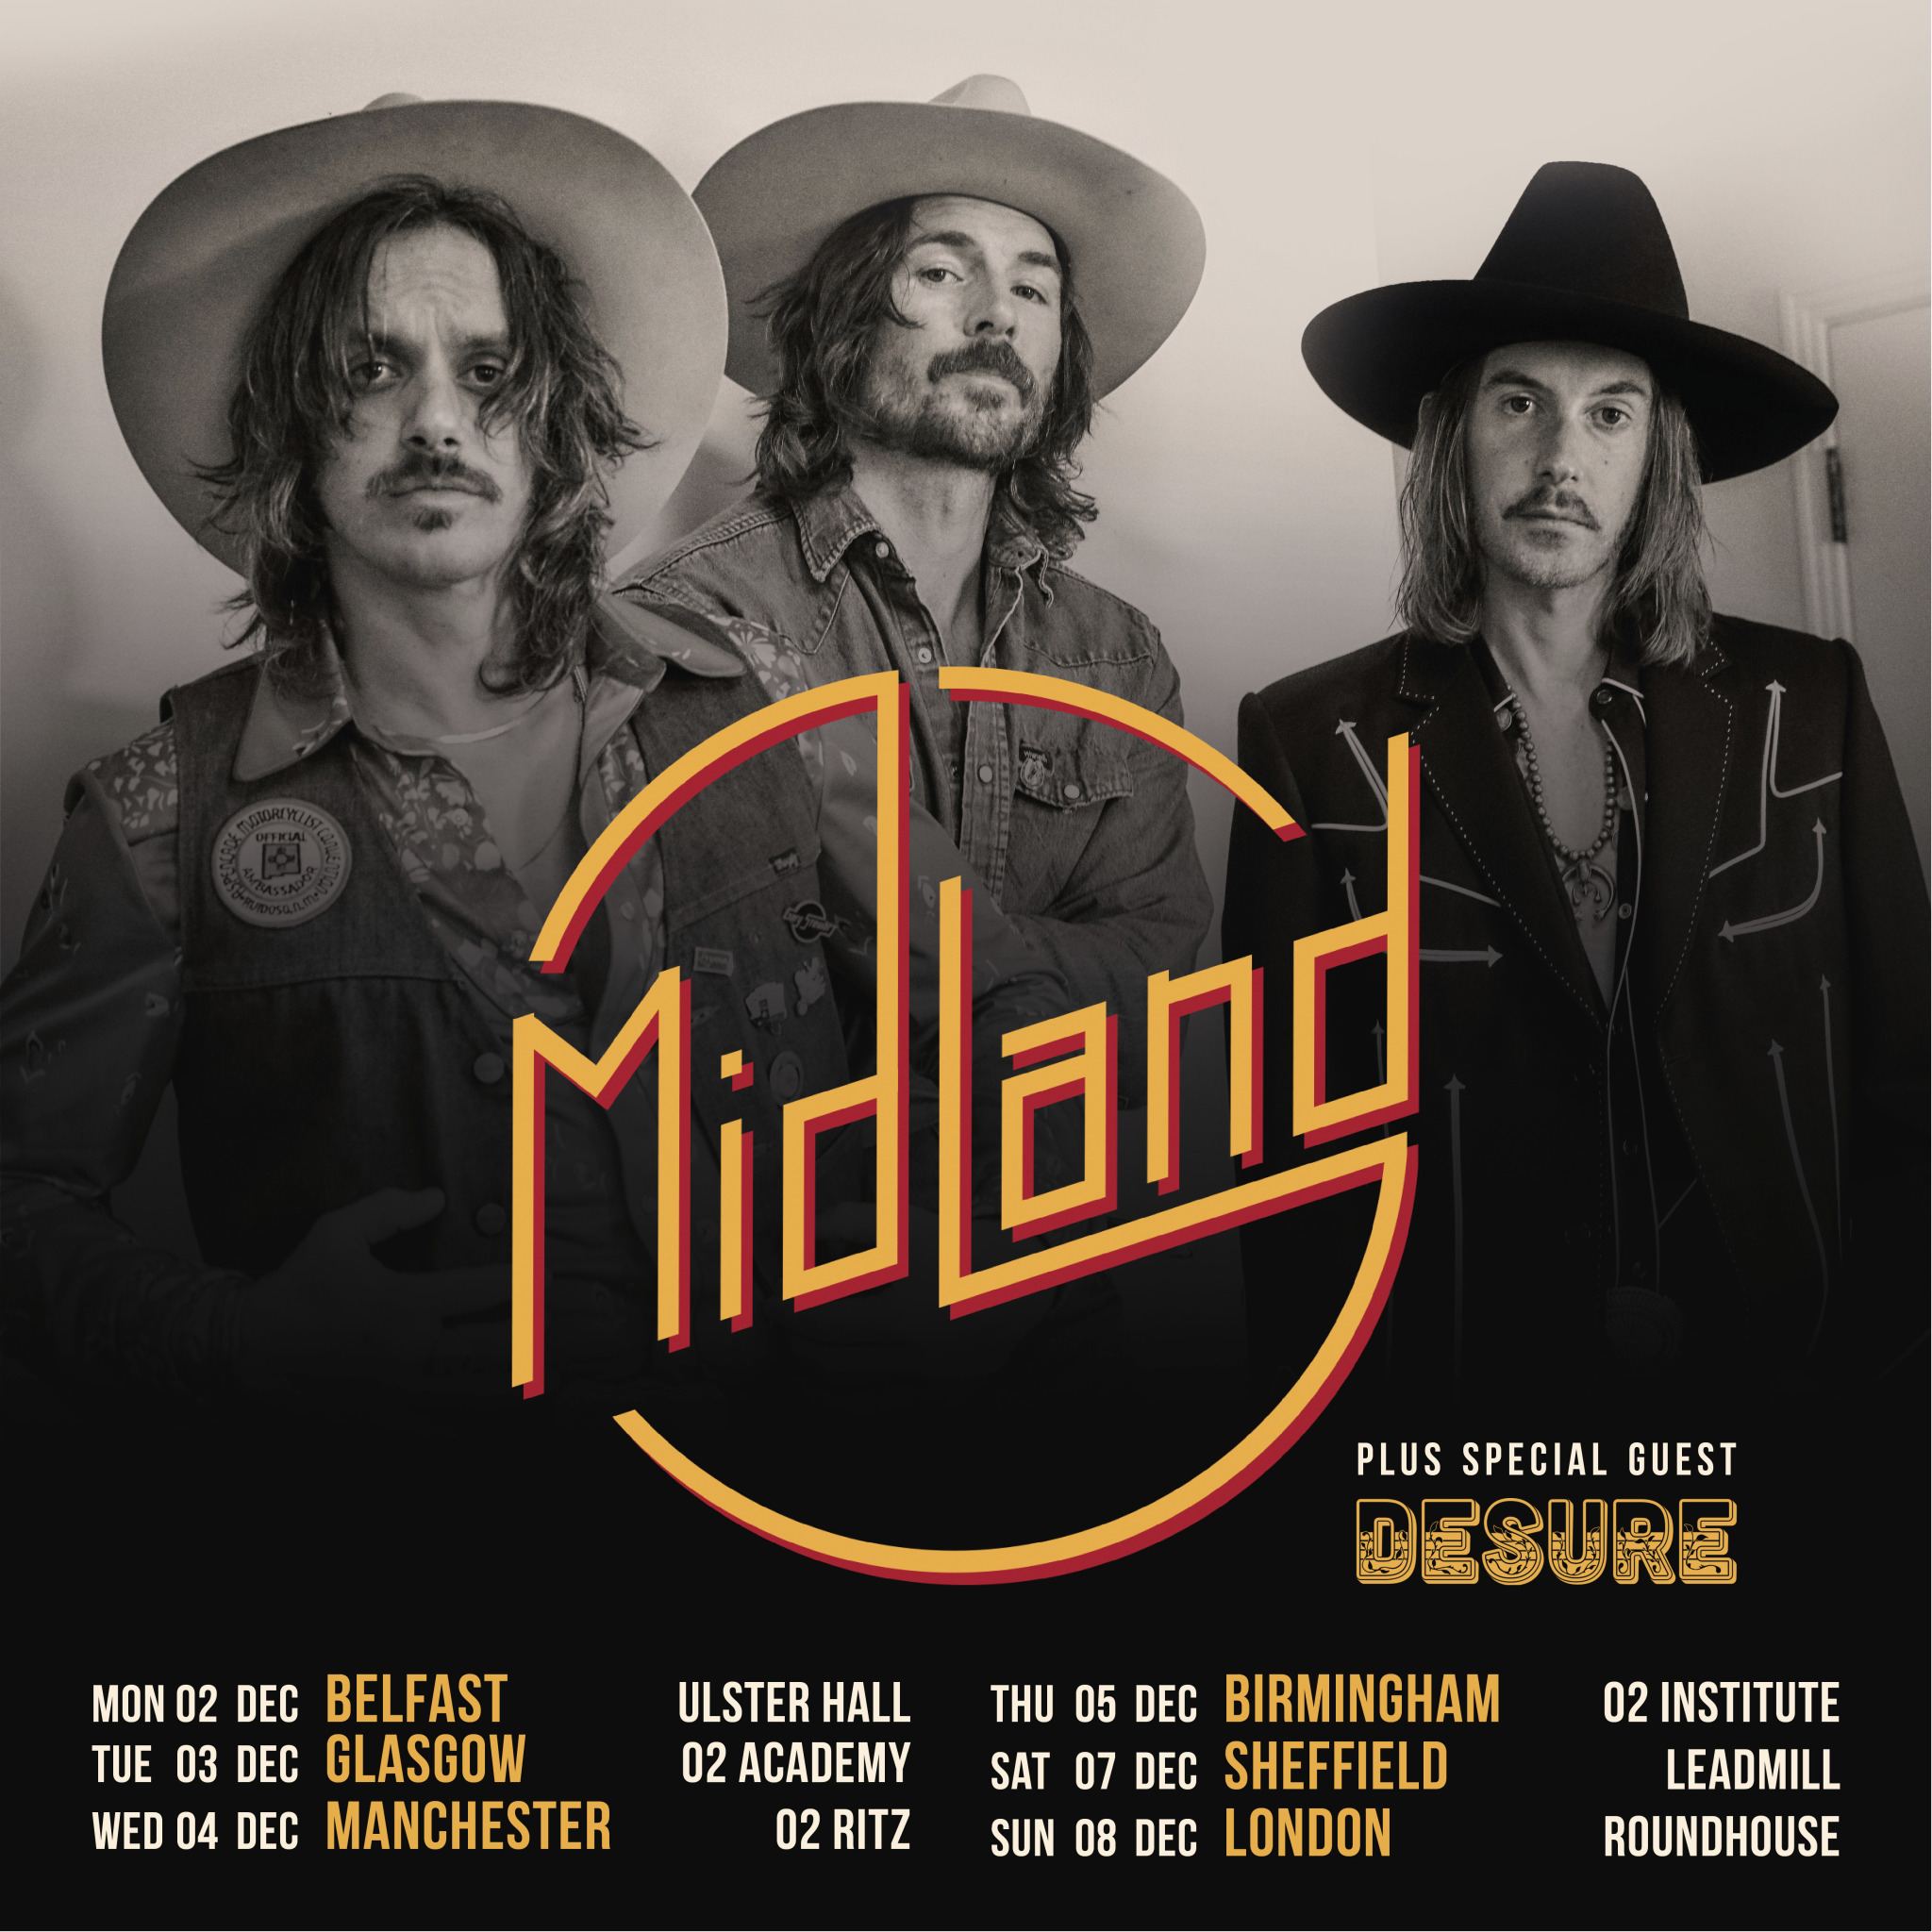 Midland announces headlining UK dates in December Country’s Chatter